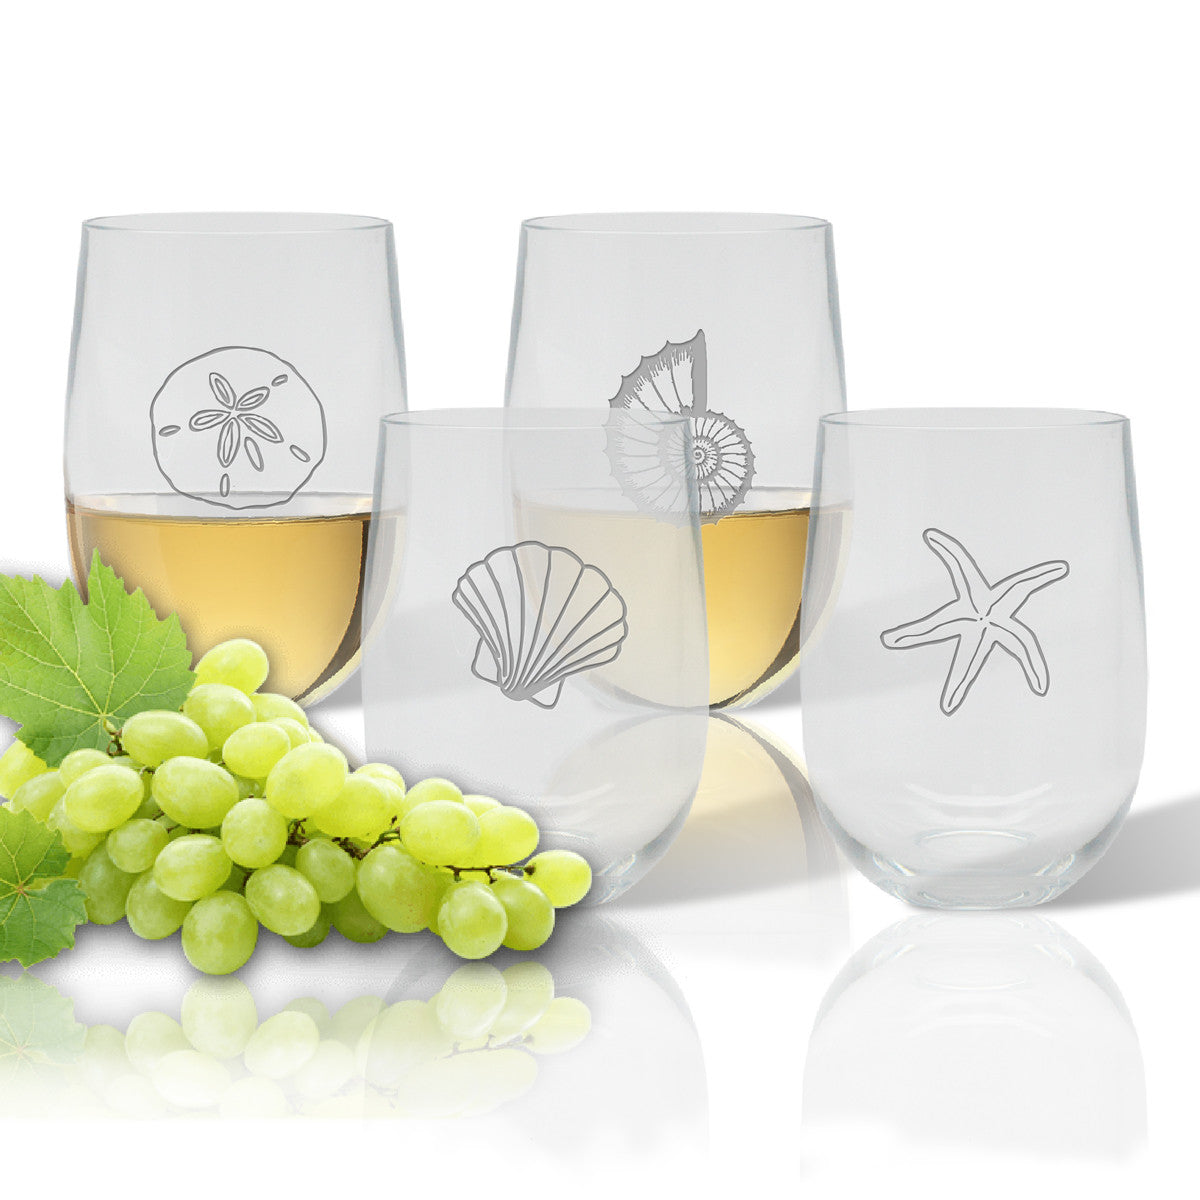 Shells Outdoor Acrylic Stemless Wine Glasses - Set of 4